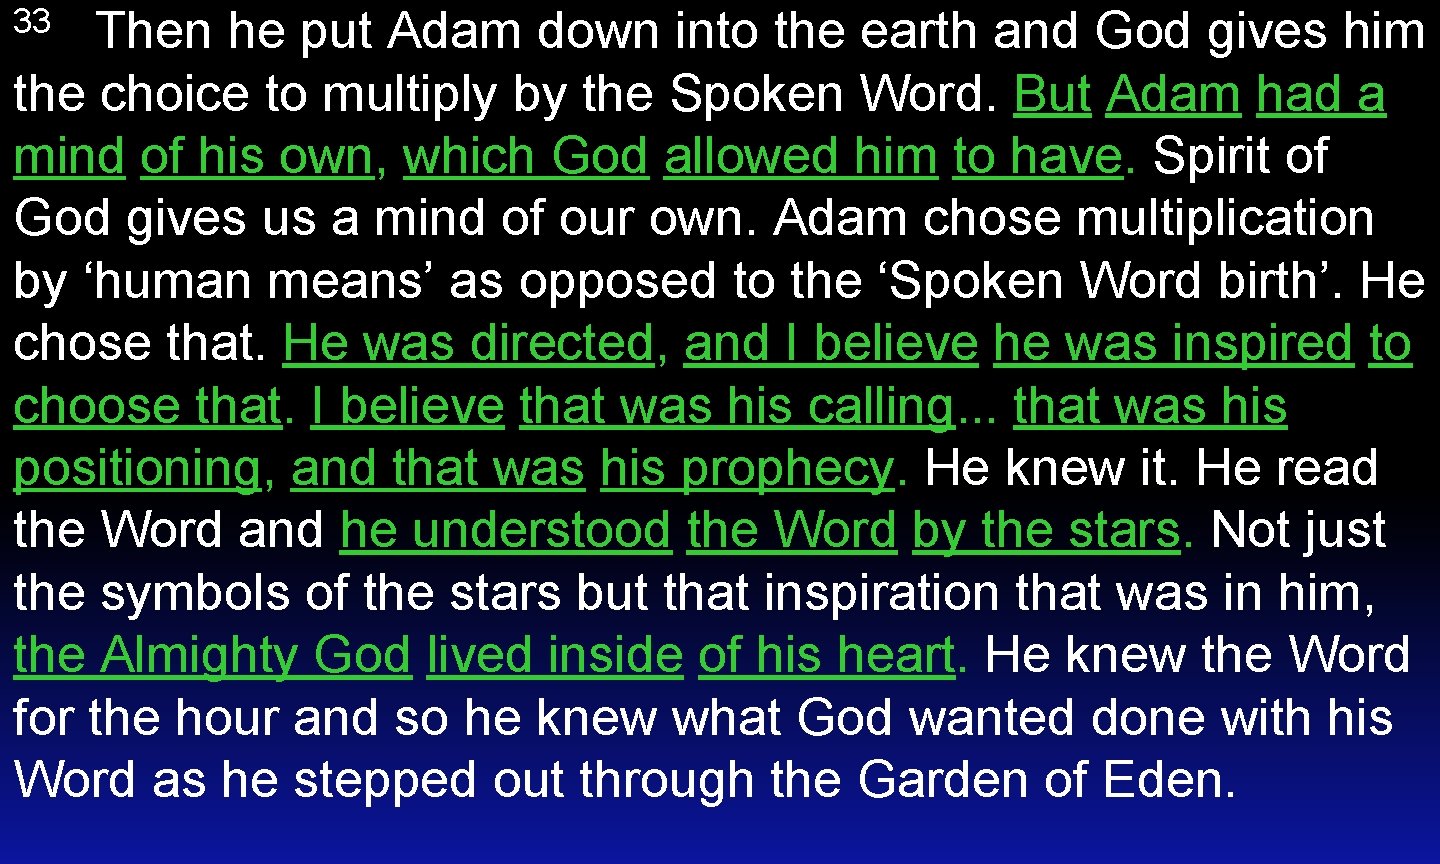 Then he put Adam down into the earth and God gives him the choice